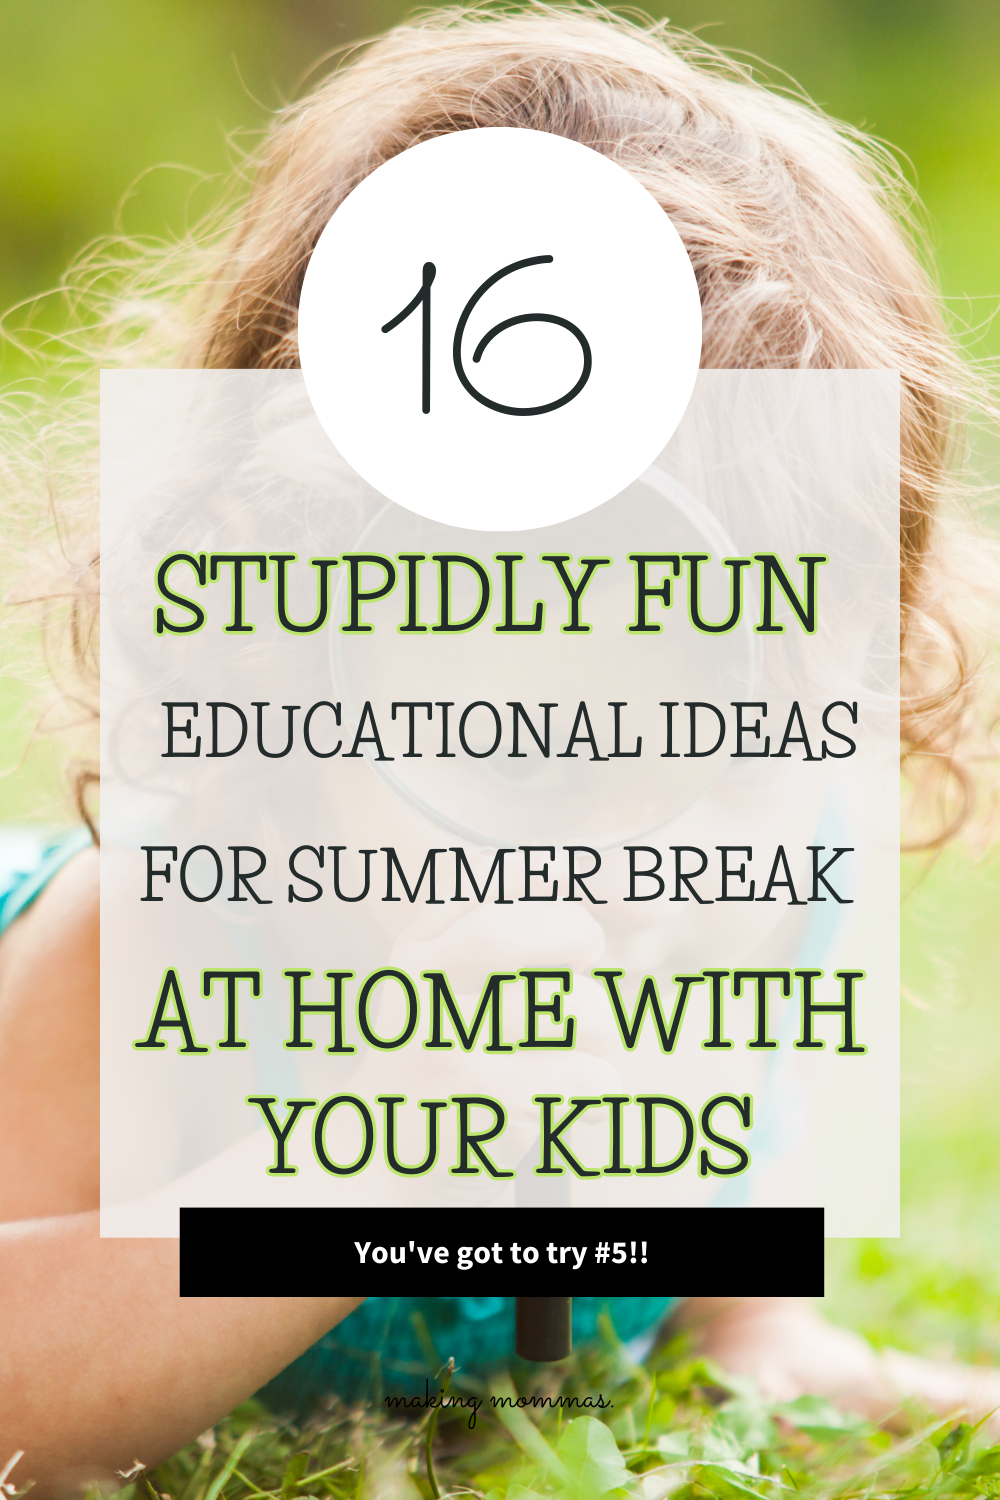 pin image of 16 stupidly fun educational ideas for summer break at home with kids